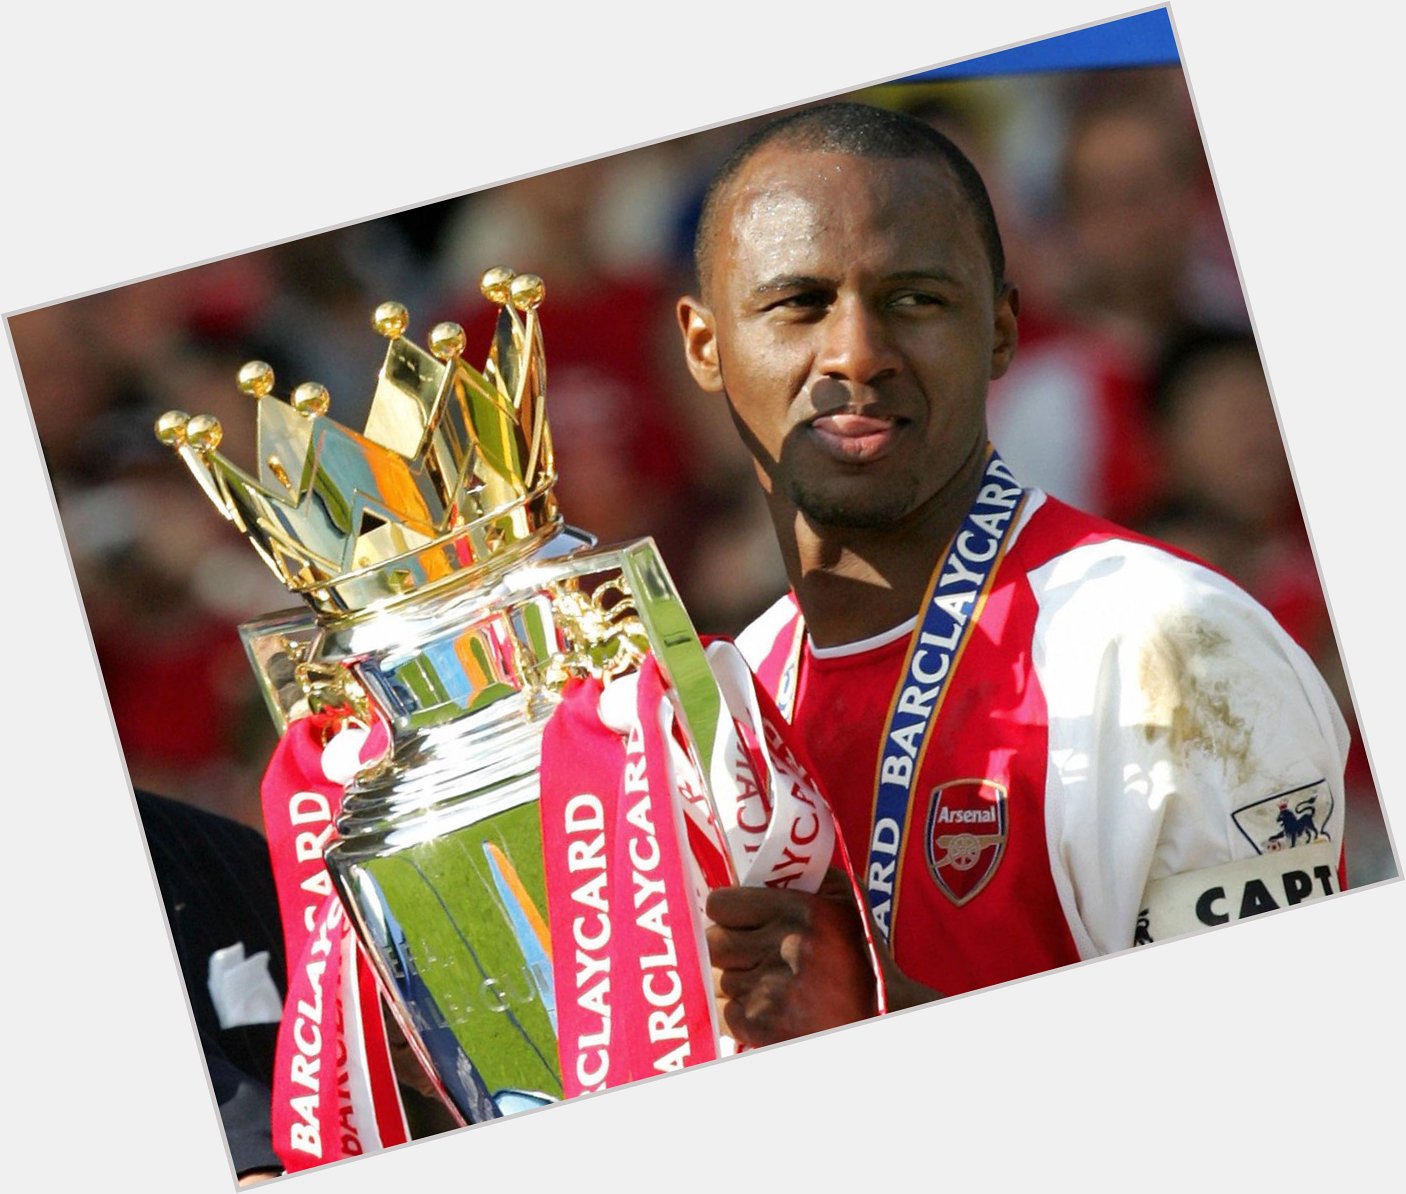 Happy Birthday to Arsenal legend & Invincibles captain Patrick Vieira, who turns 45 today! 